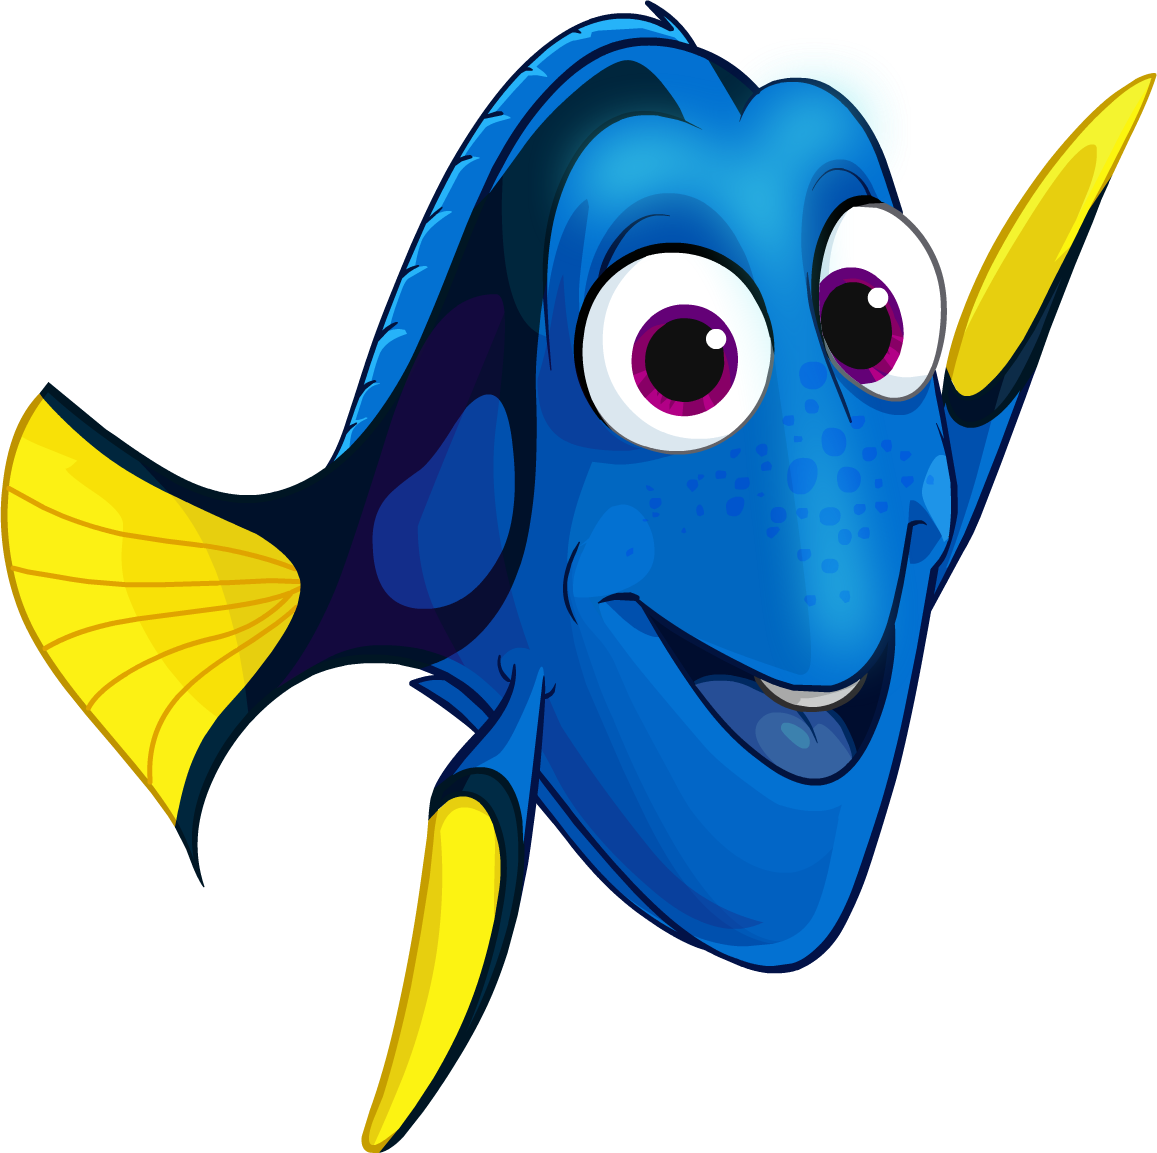 Image Dory.png Club Penguin Wiki Fandom powered by Wikia